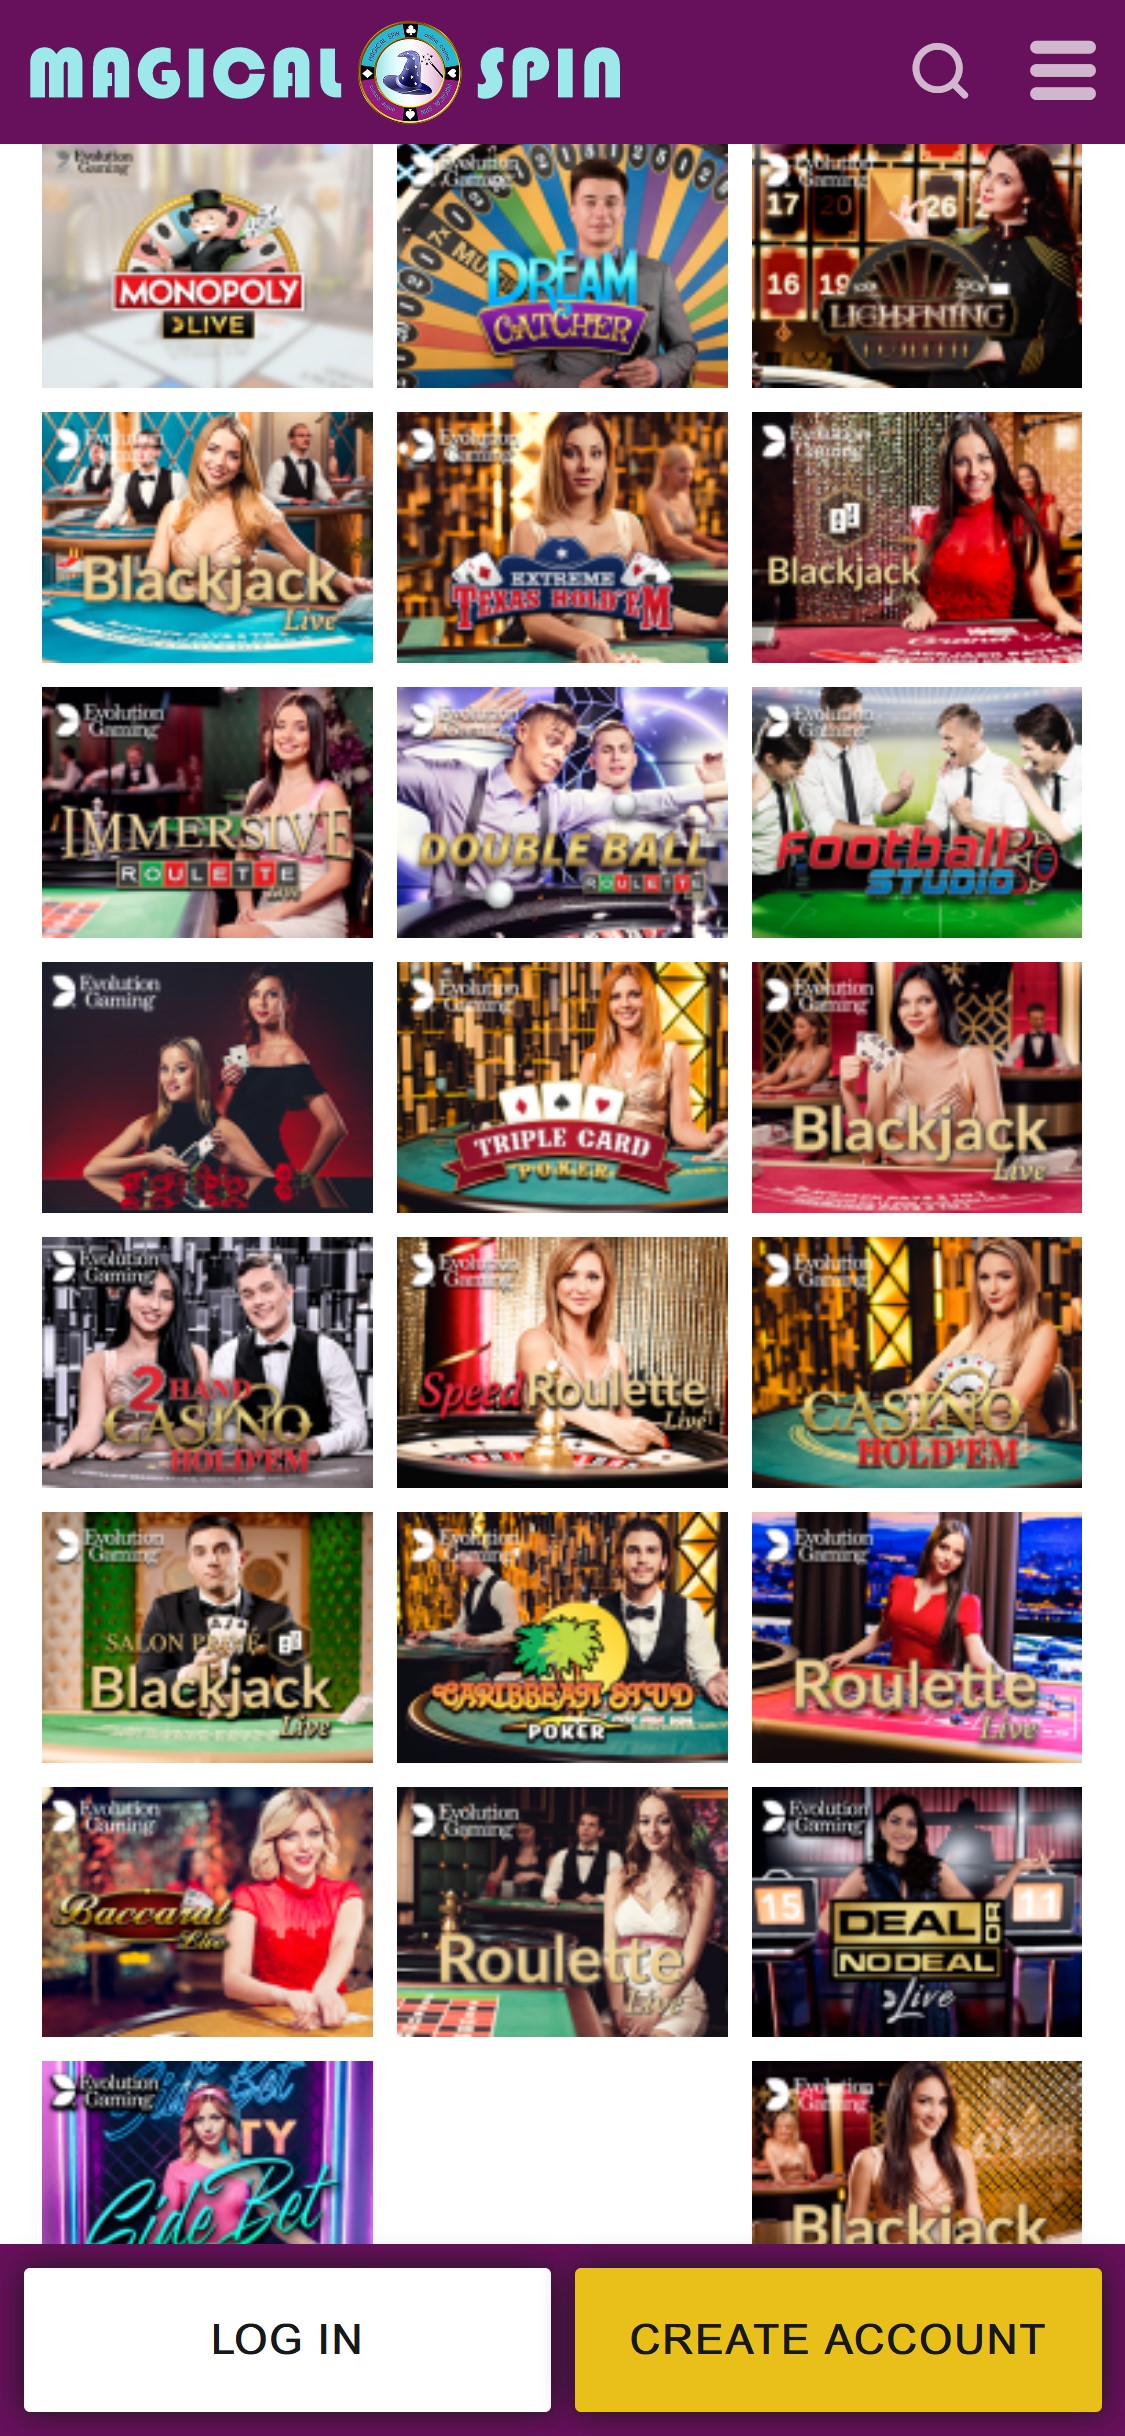 Magical Spin Casino Mobile Live Dealer Games Review